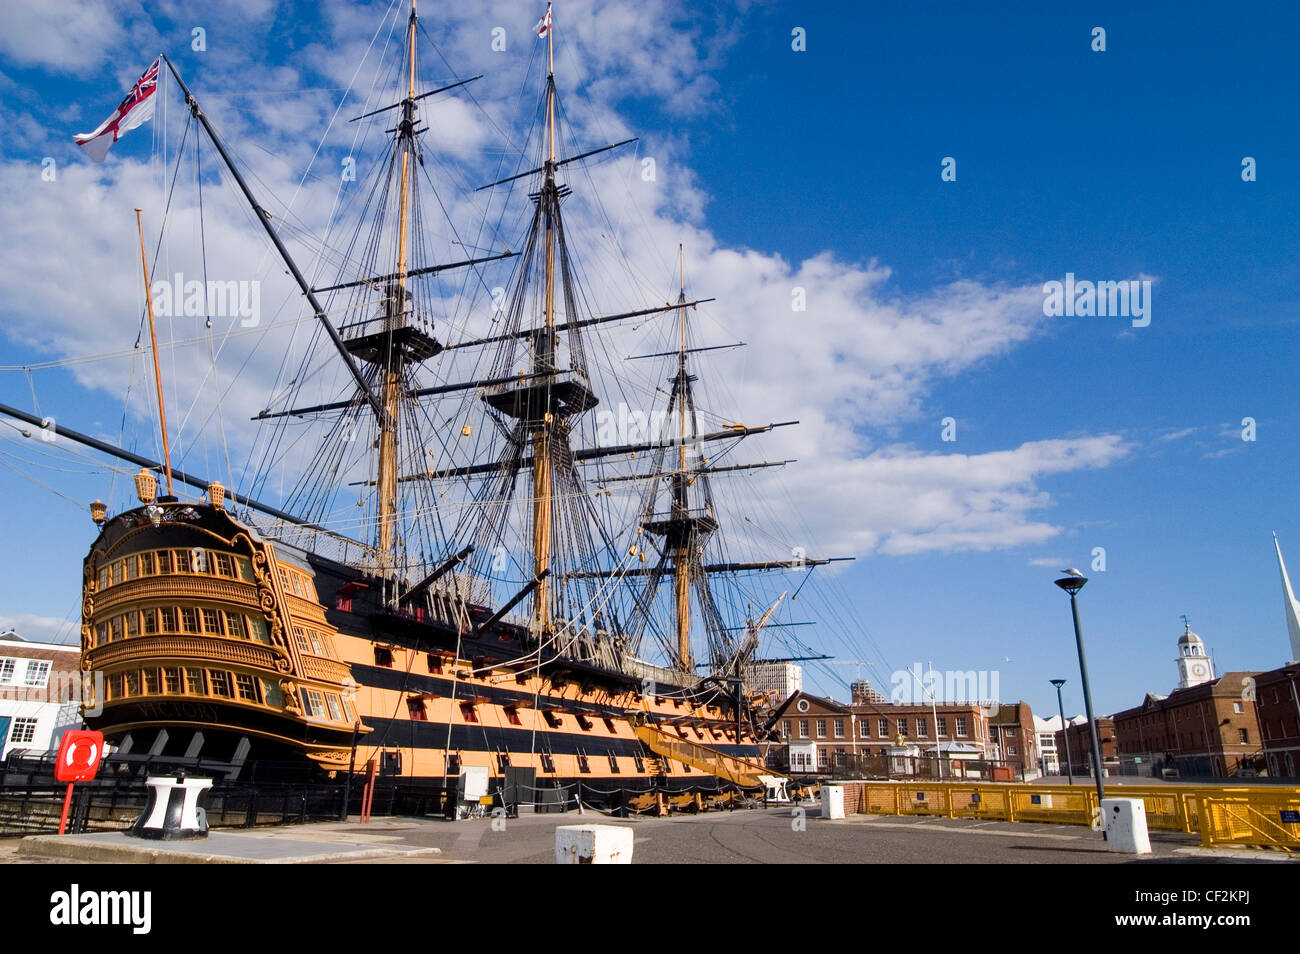 The oldest commisioned warship in the world, the Royal Navy's HMS Victory at Portsmouth. The Victory was the Flagship of Lord Ne Stock Photo